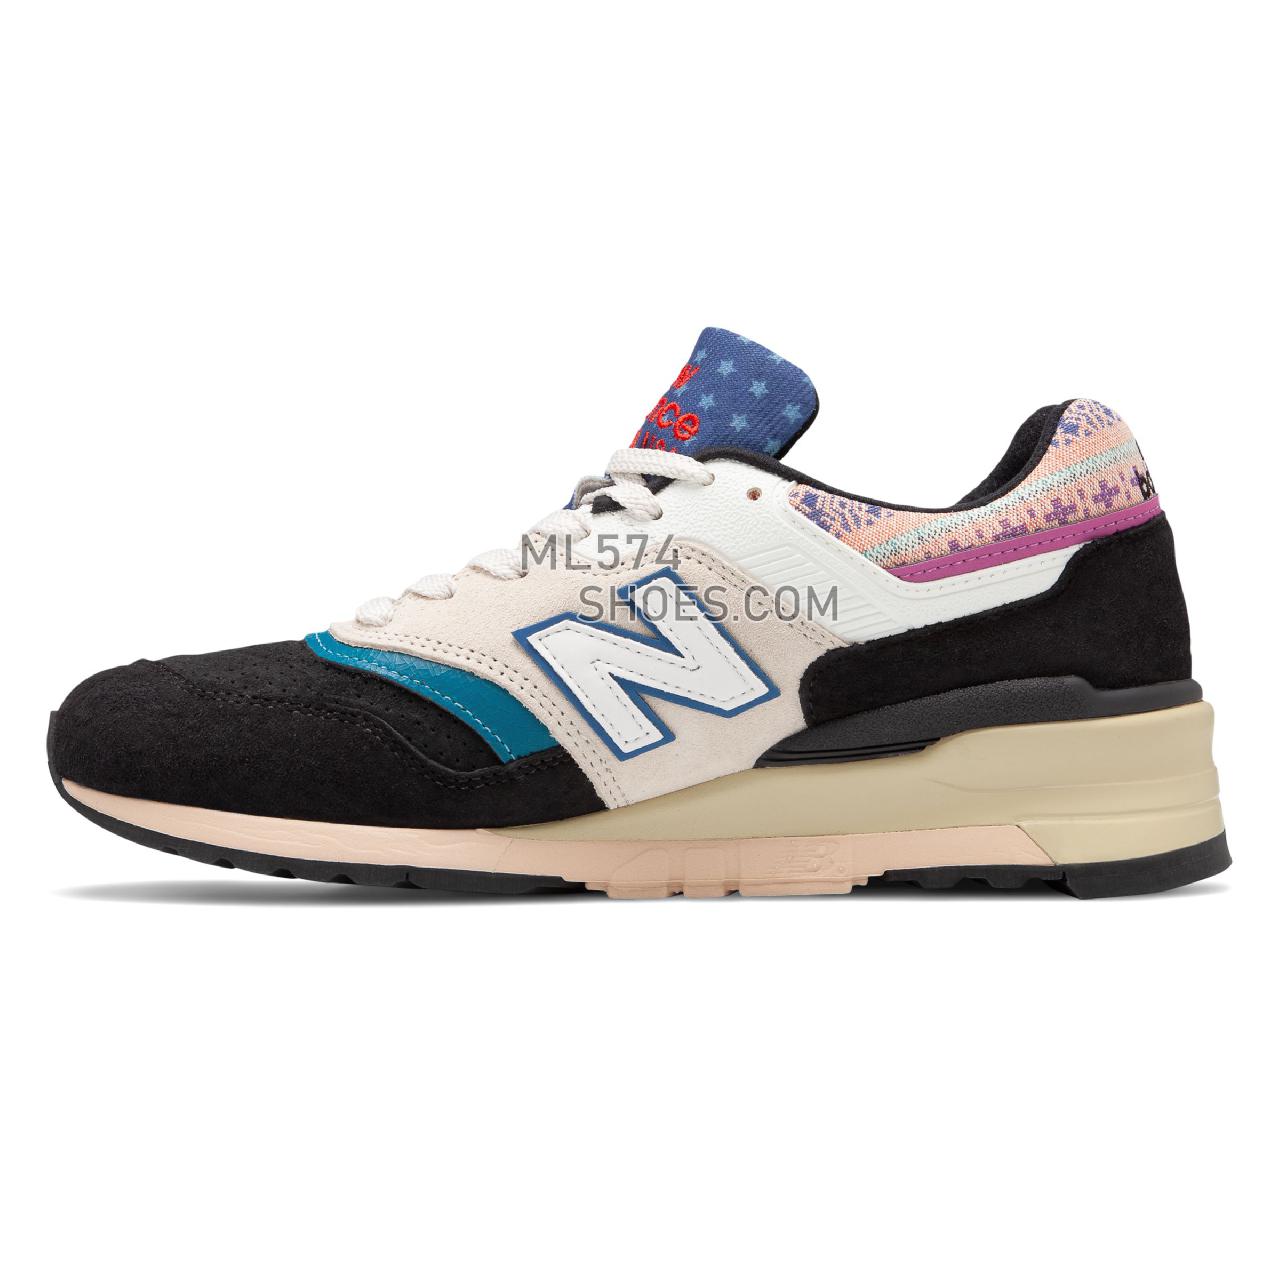 New Balance Made in US 997 - Men's Made in US 997 - Black with Nimbus Cloud - M997PAL